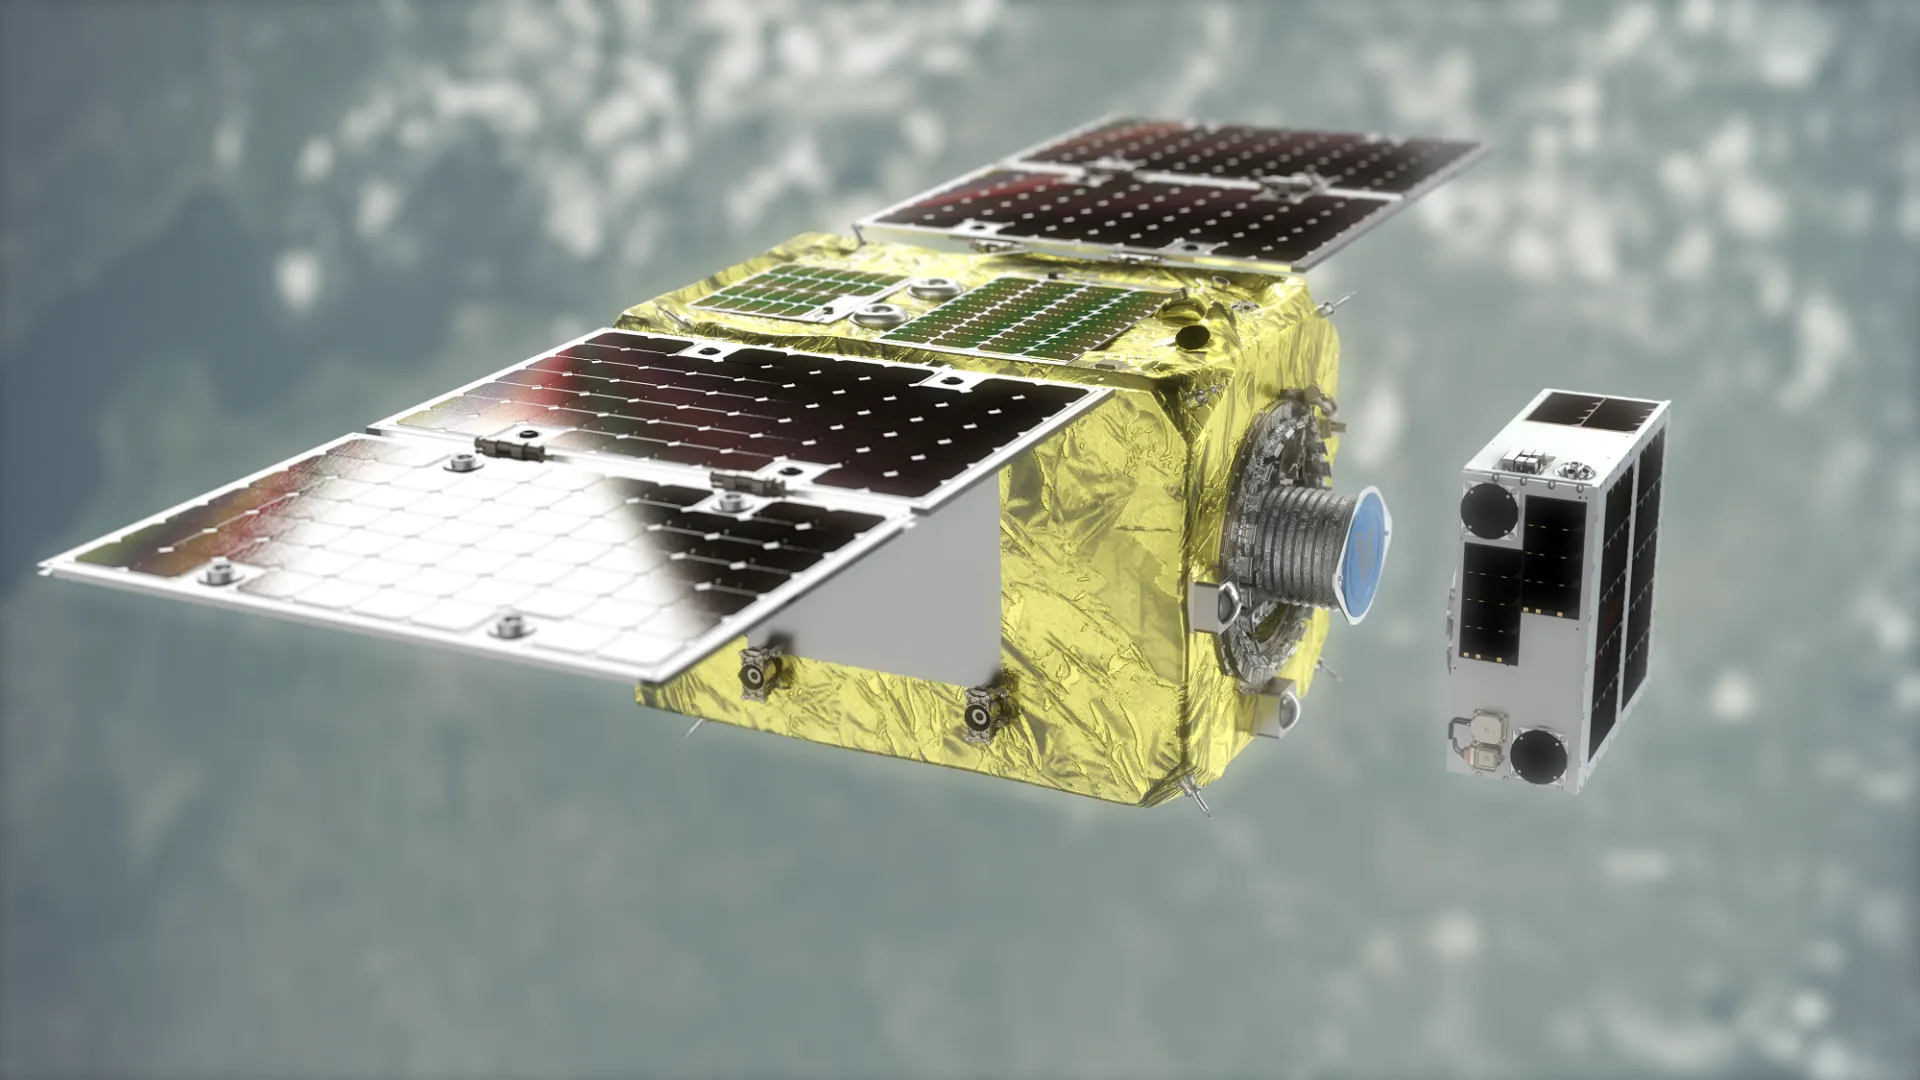 Cleaning up retired satellites: The Astroscale ELSA-M spacecraft will be designed to de-orbit multiple retired satellites in low Earth orbit